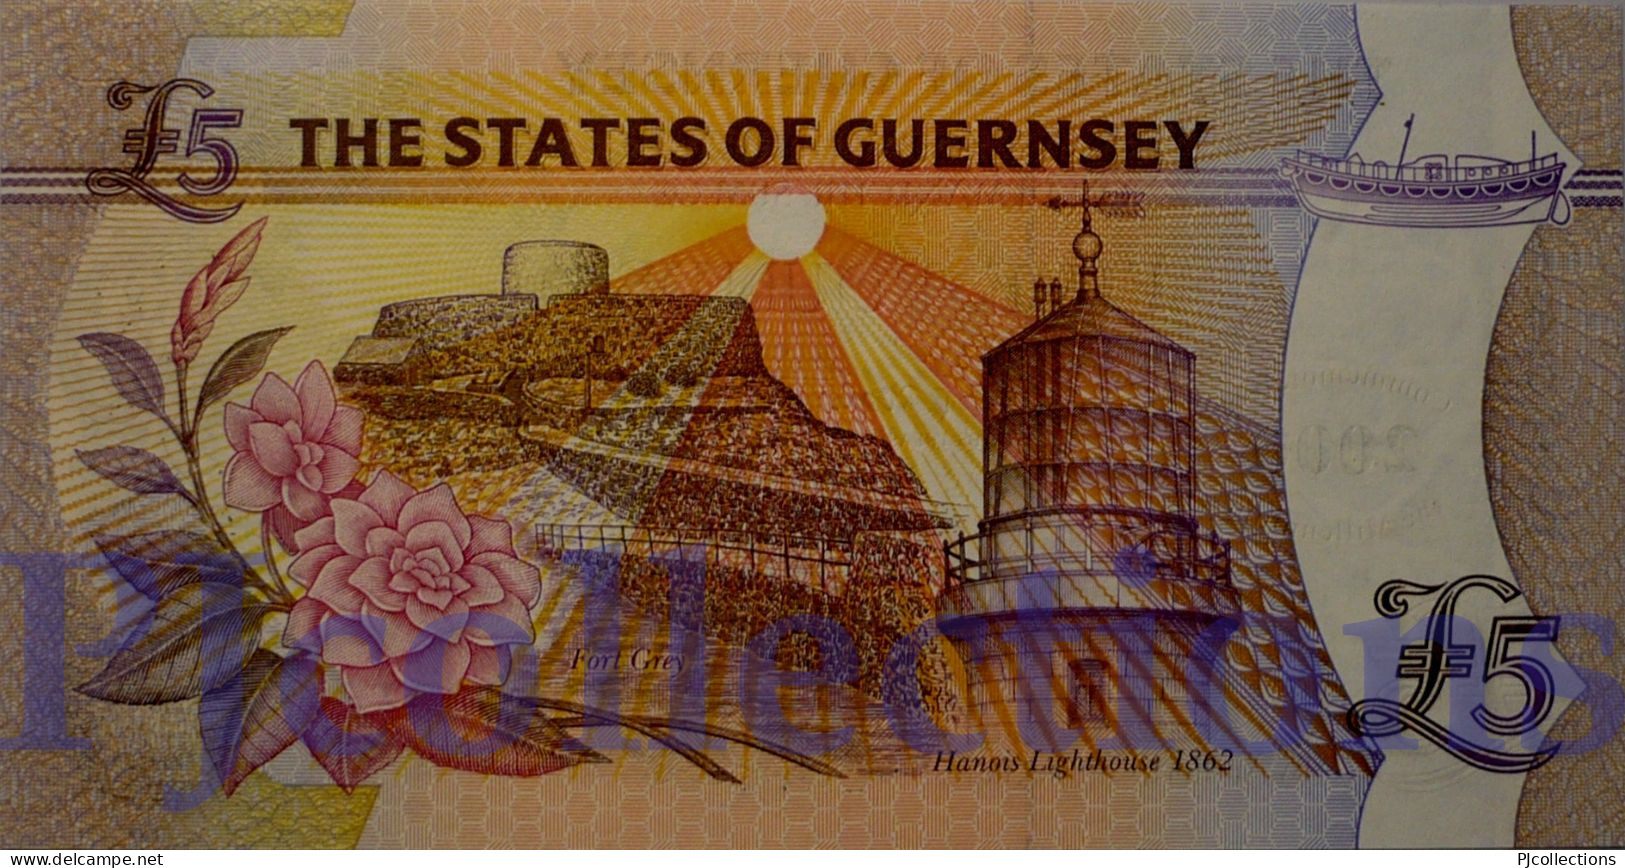 GUERNSEY 5 POUNDS 2000 PICK 60 UNC - Guernesey